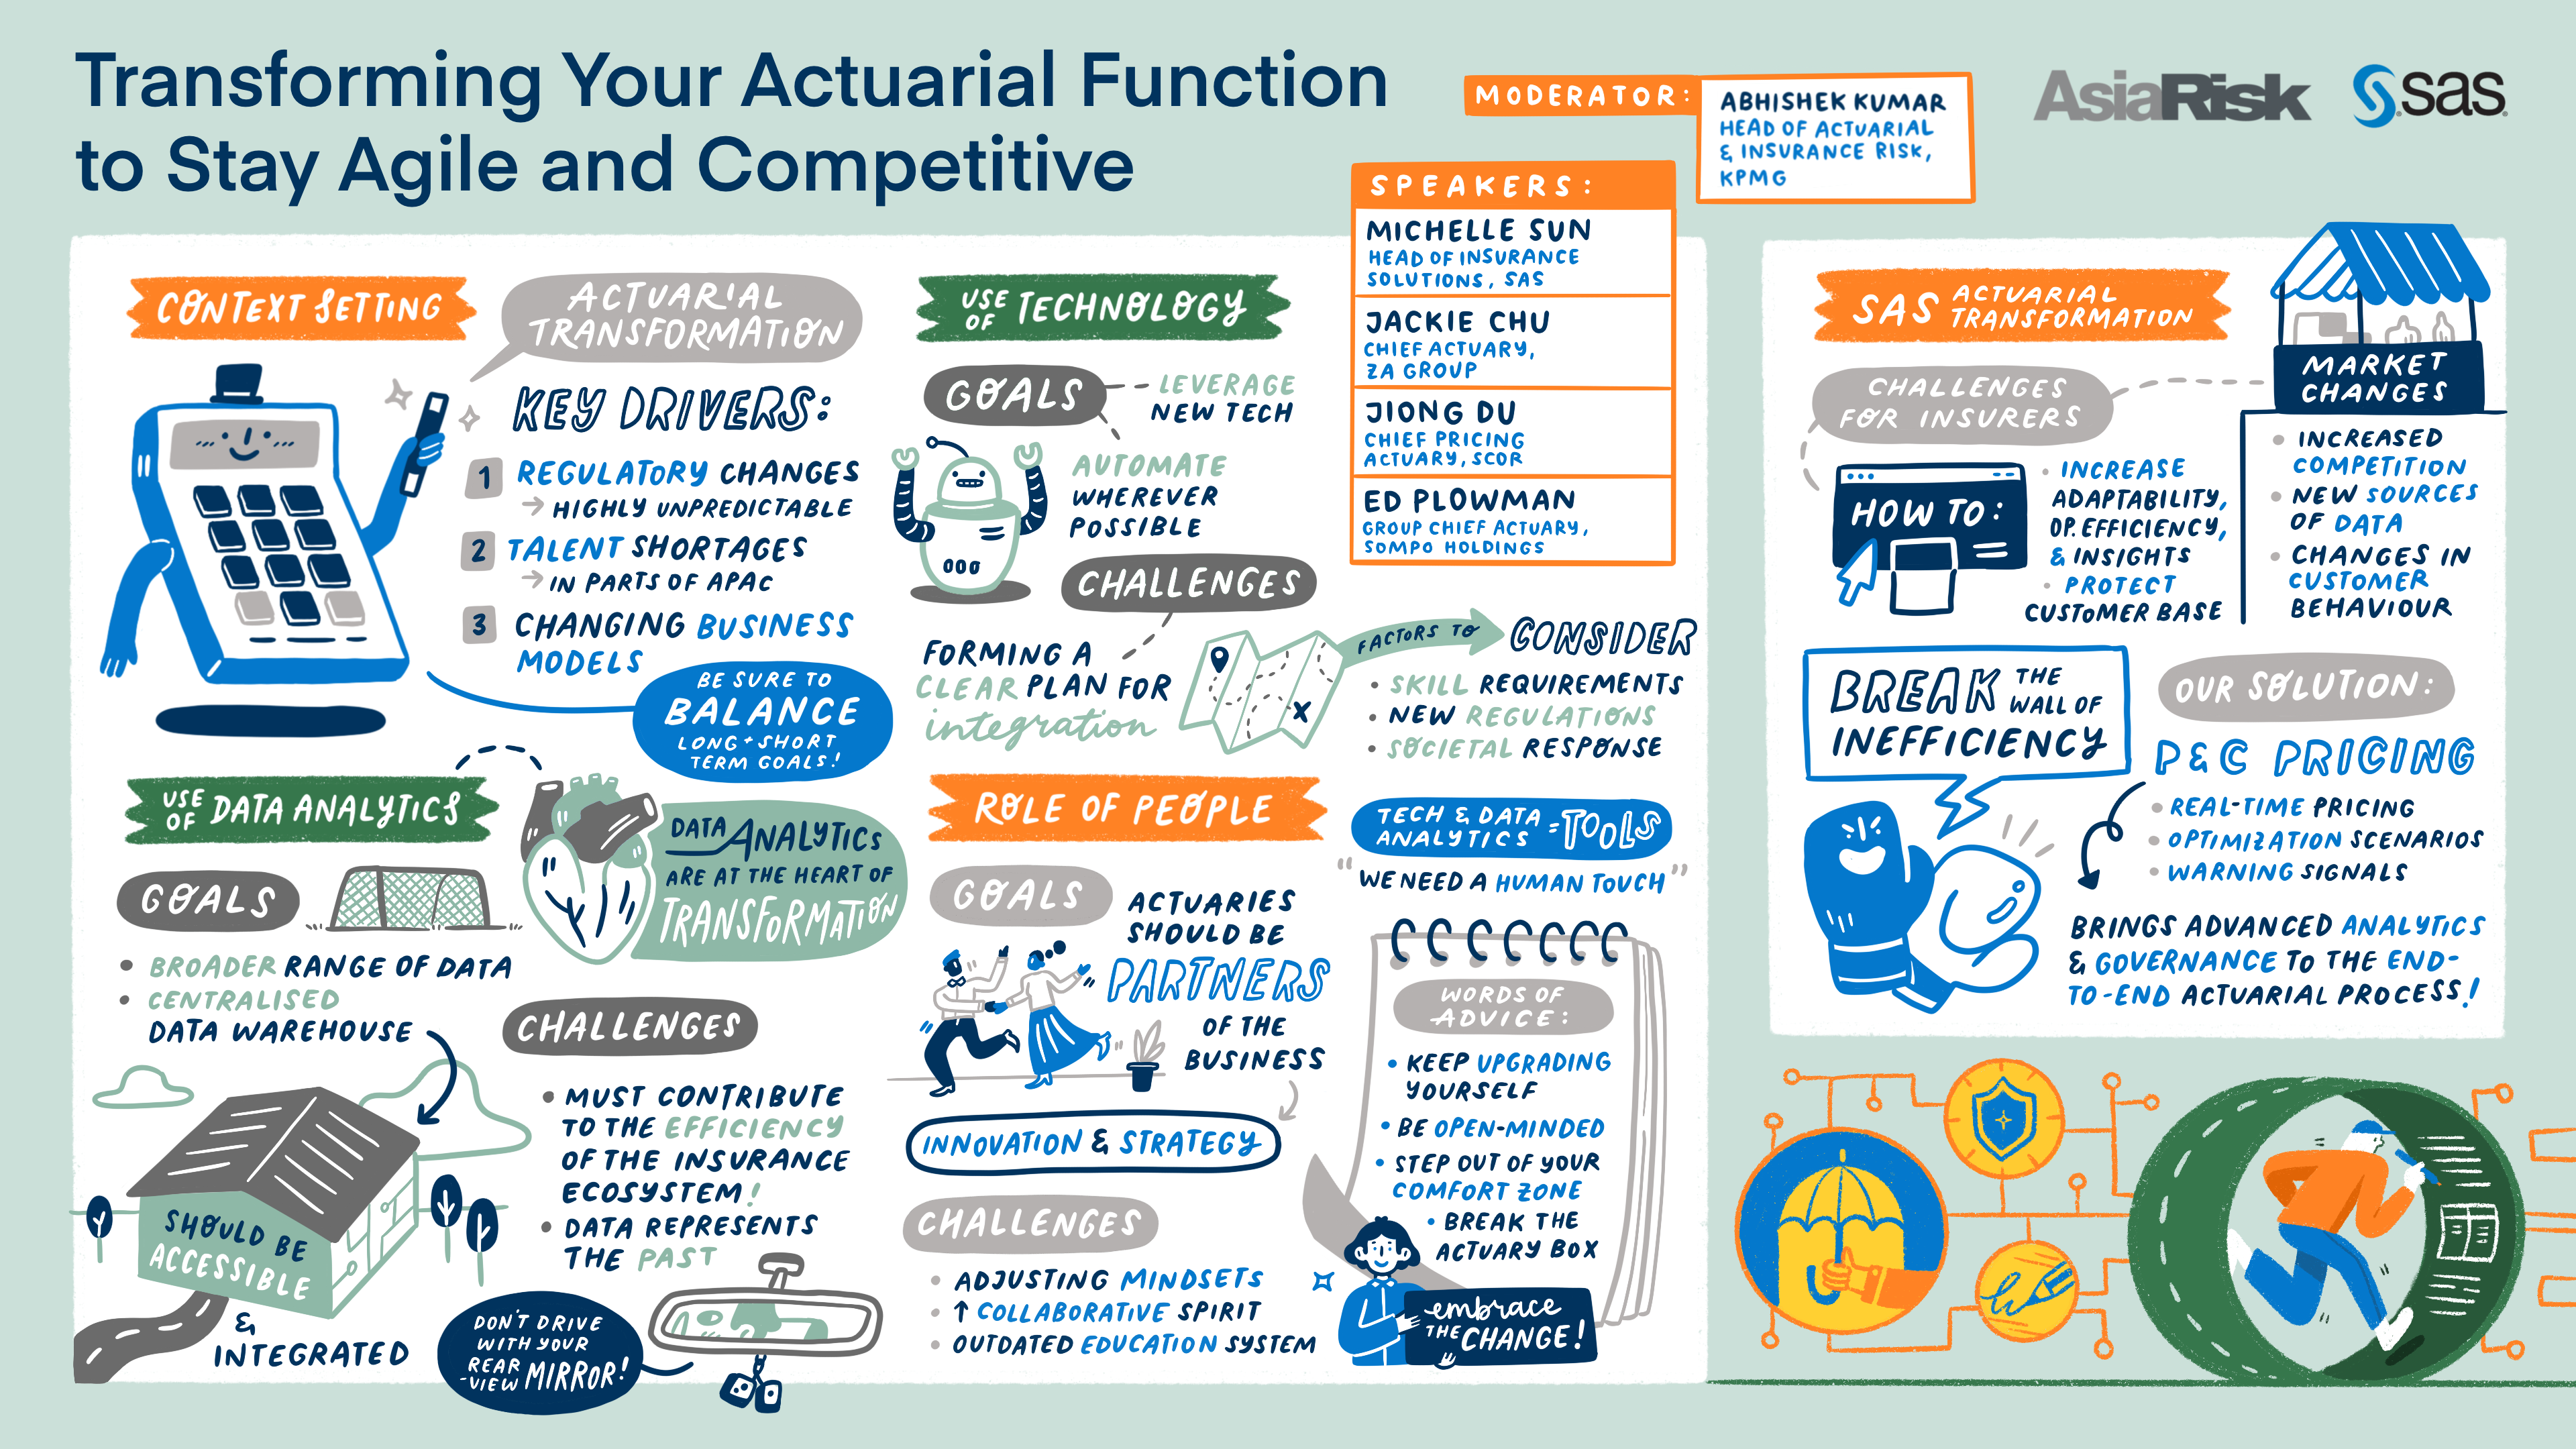 Transforming your actuarial function to stay agile and competitive